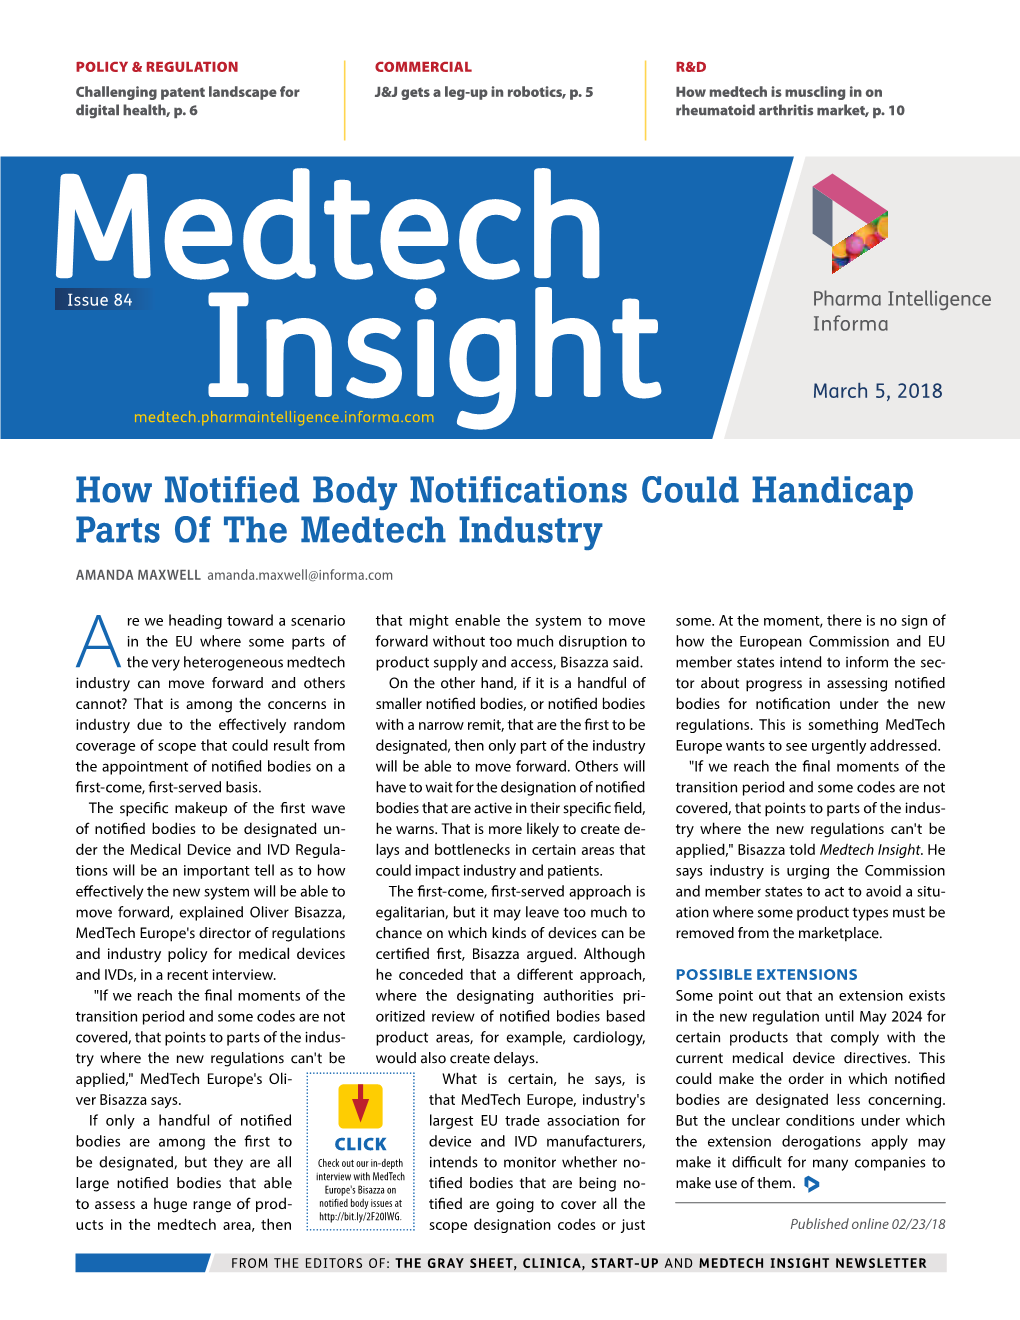 How Notified Body Notifications Could Handicap Parts of the Medtech Industry